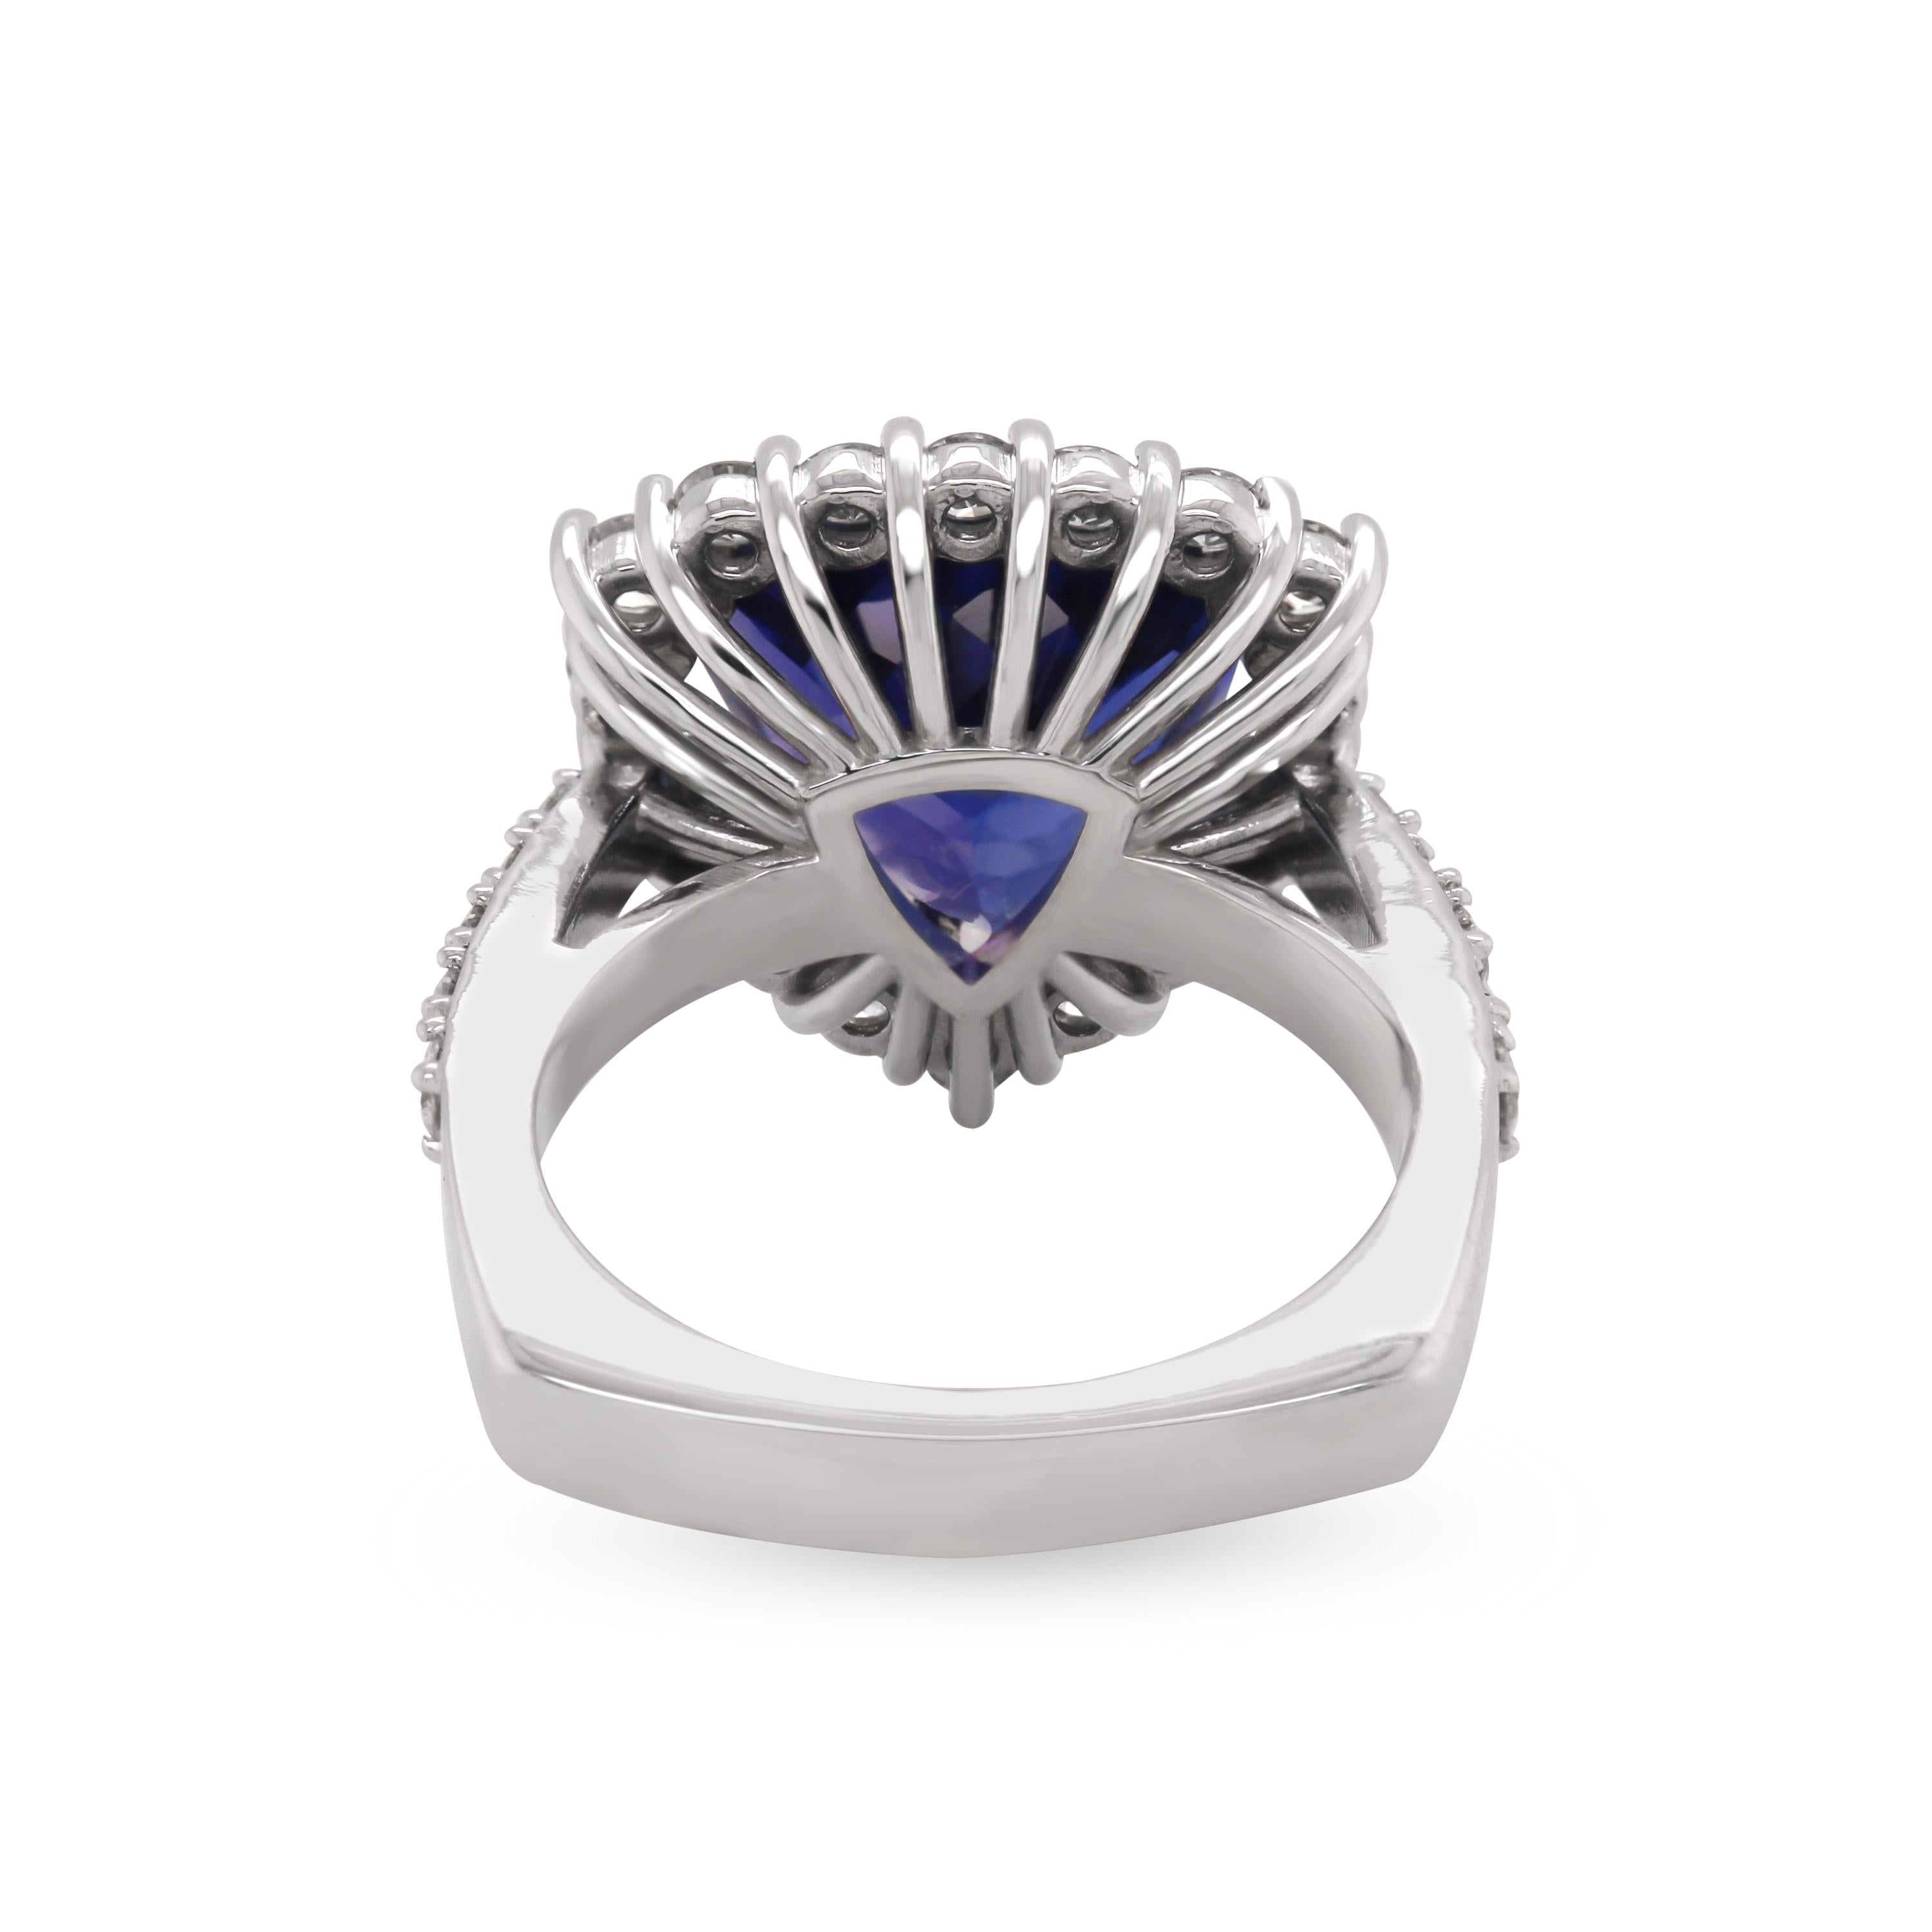 18 Karat White Gold Diamond 6.70 Carat Trillion Cut Tanzanite Cocktail Ring

This one-of-a-kind ring features a trillion-cut Tanzanite center with diamonds surrounding the center stone along with half way across the band.

6.70 carat Tanzanite